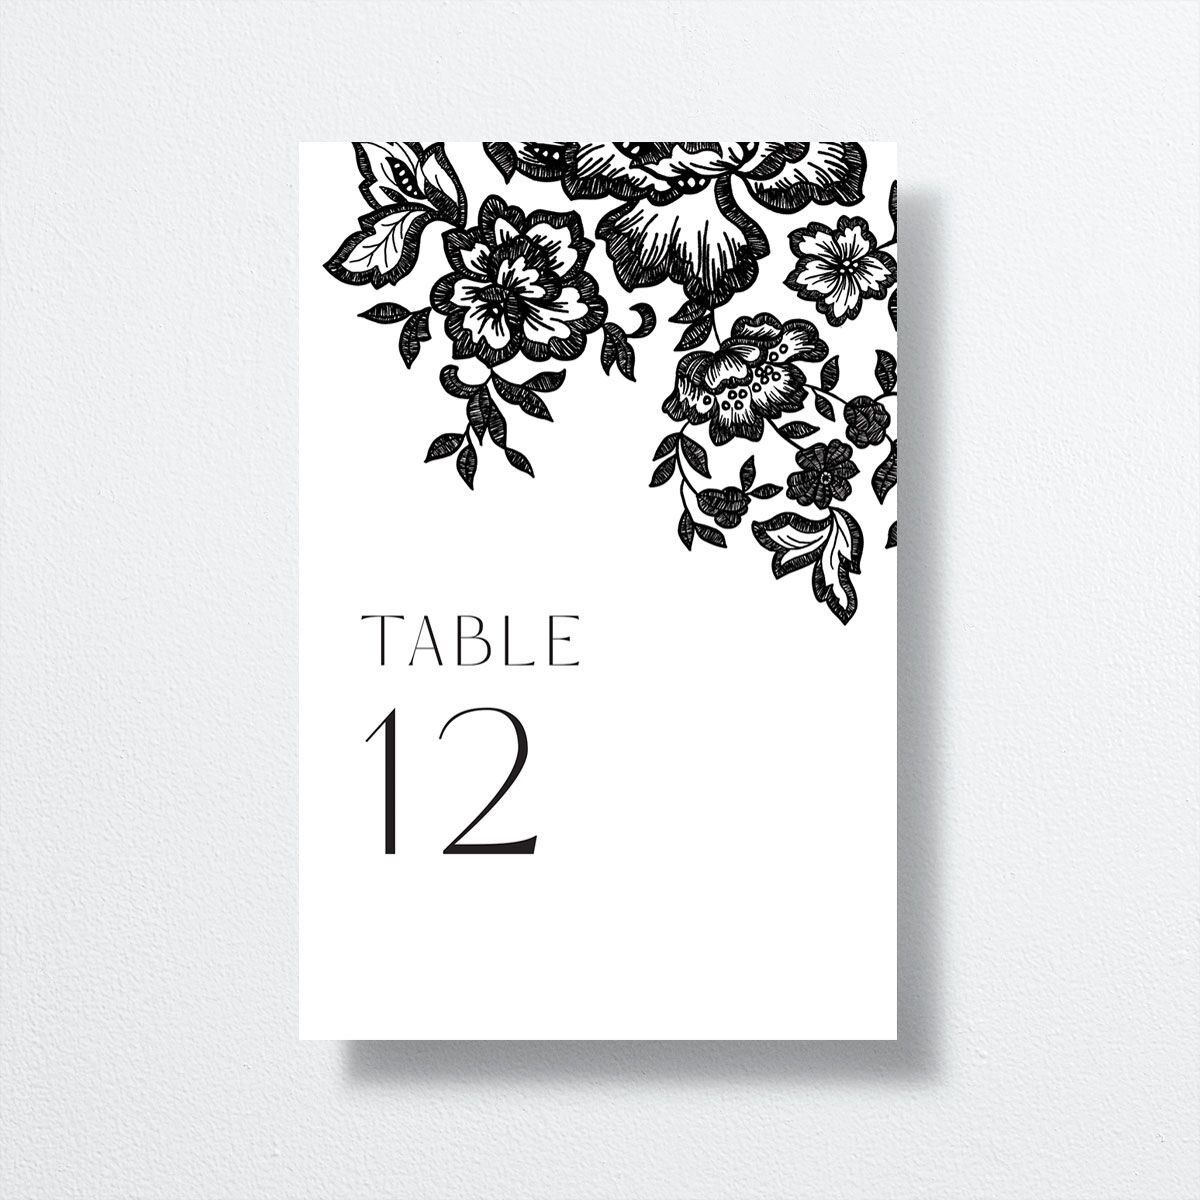 Etched Florals Table Numbers by Vera Wang back in Black